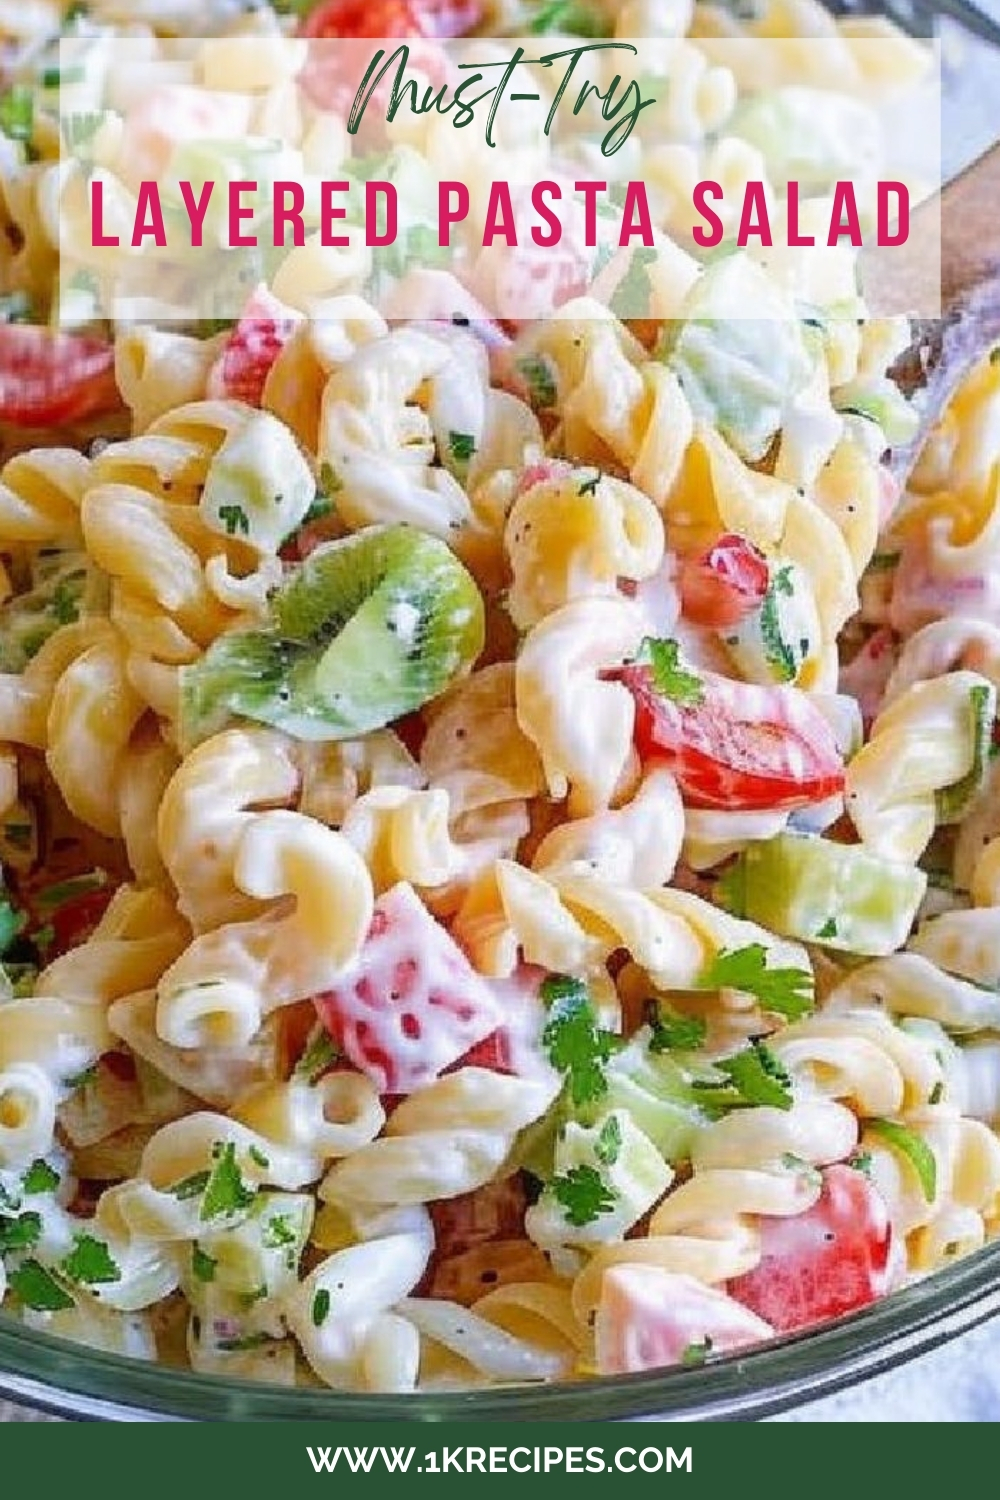 Best Layered Pasta Salad, A Must-Try Recipe